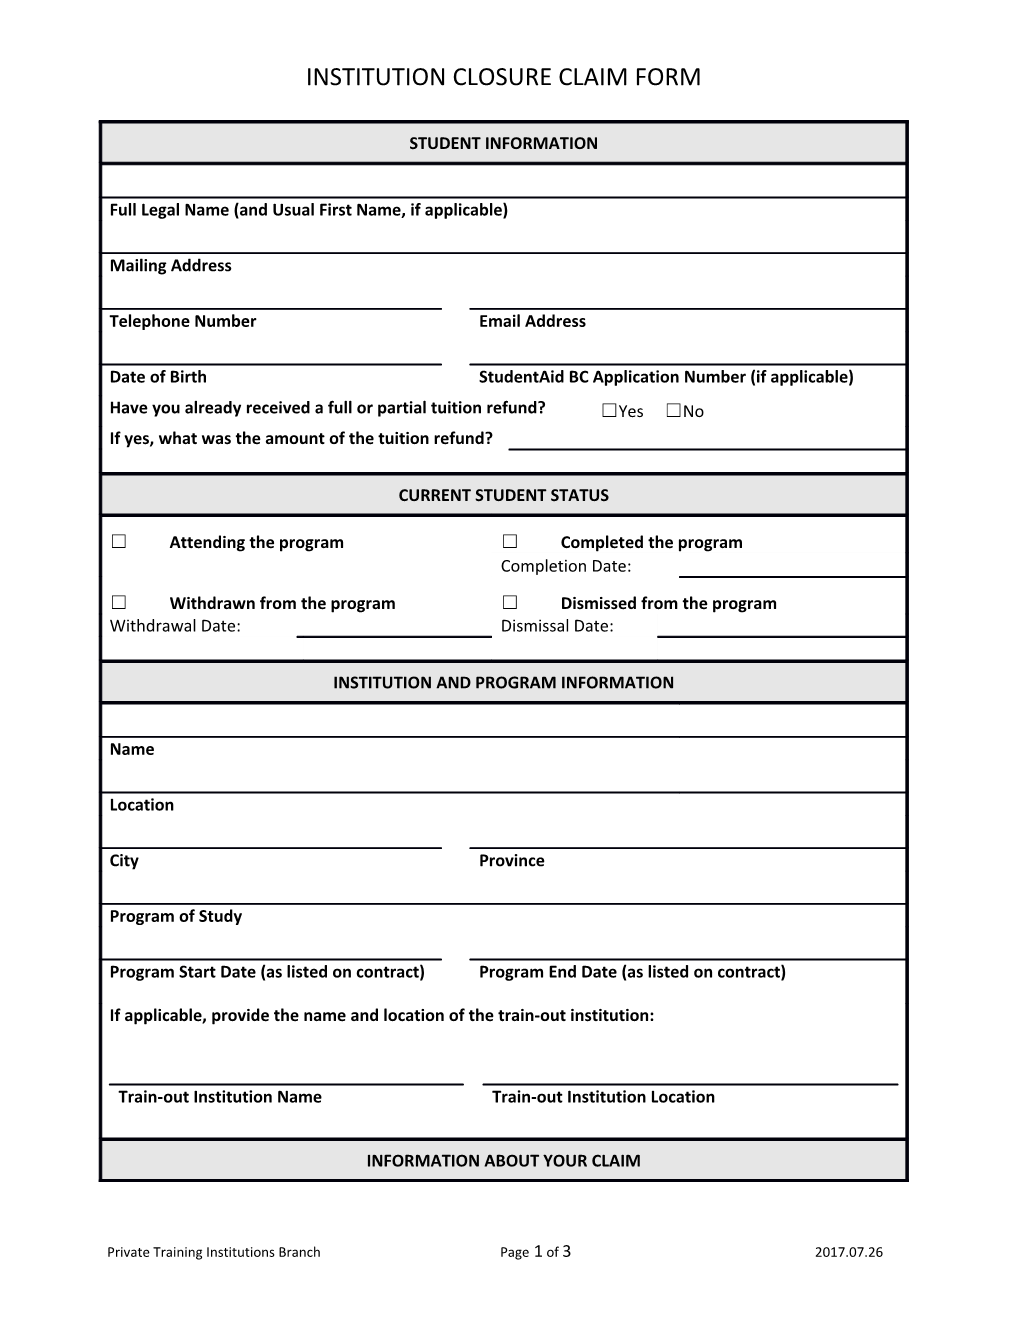 Student Tuition Protection Fund Claim Form